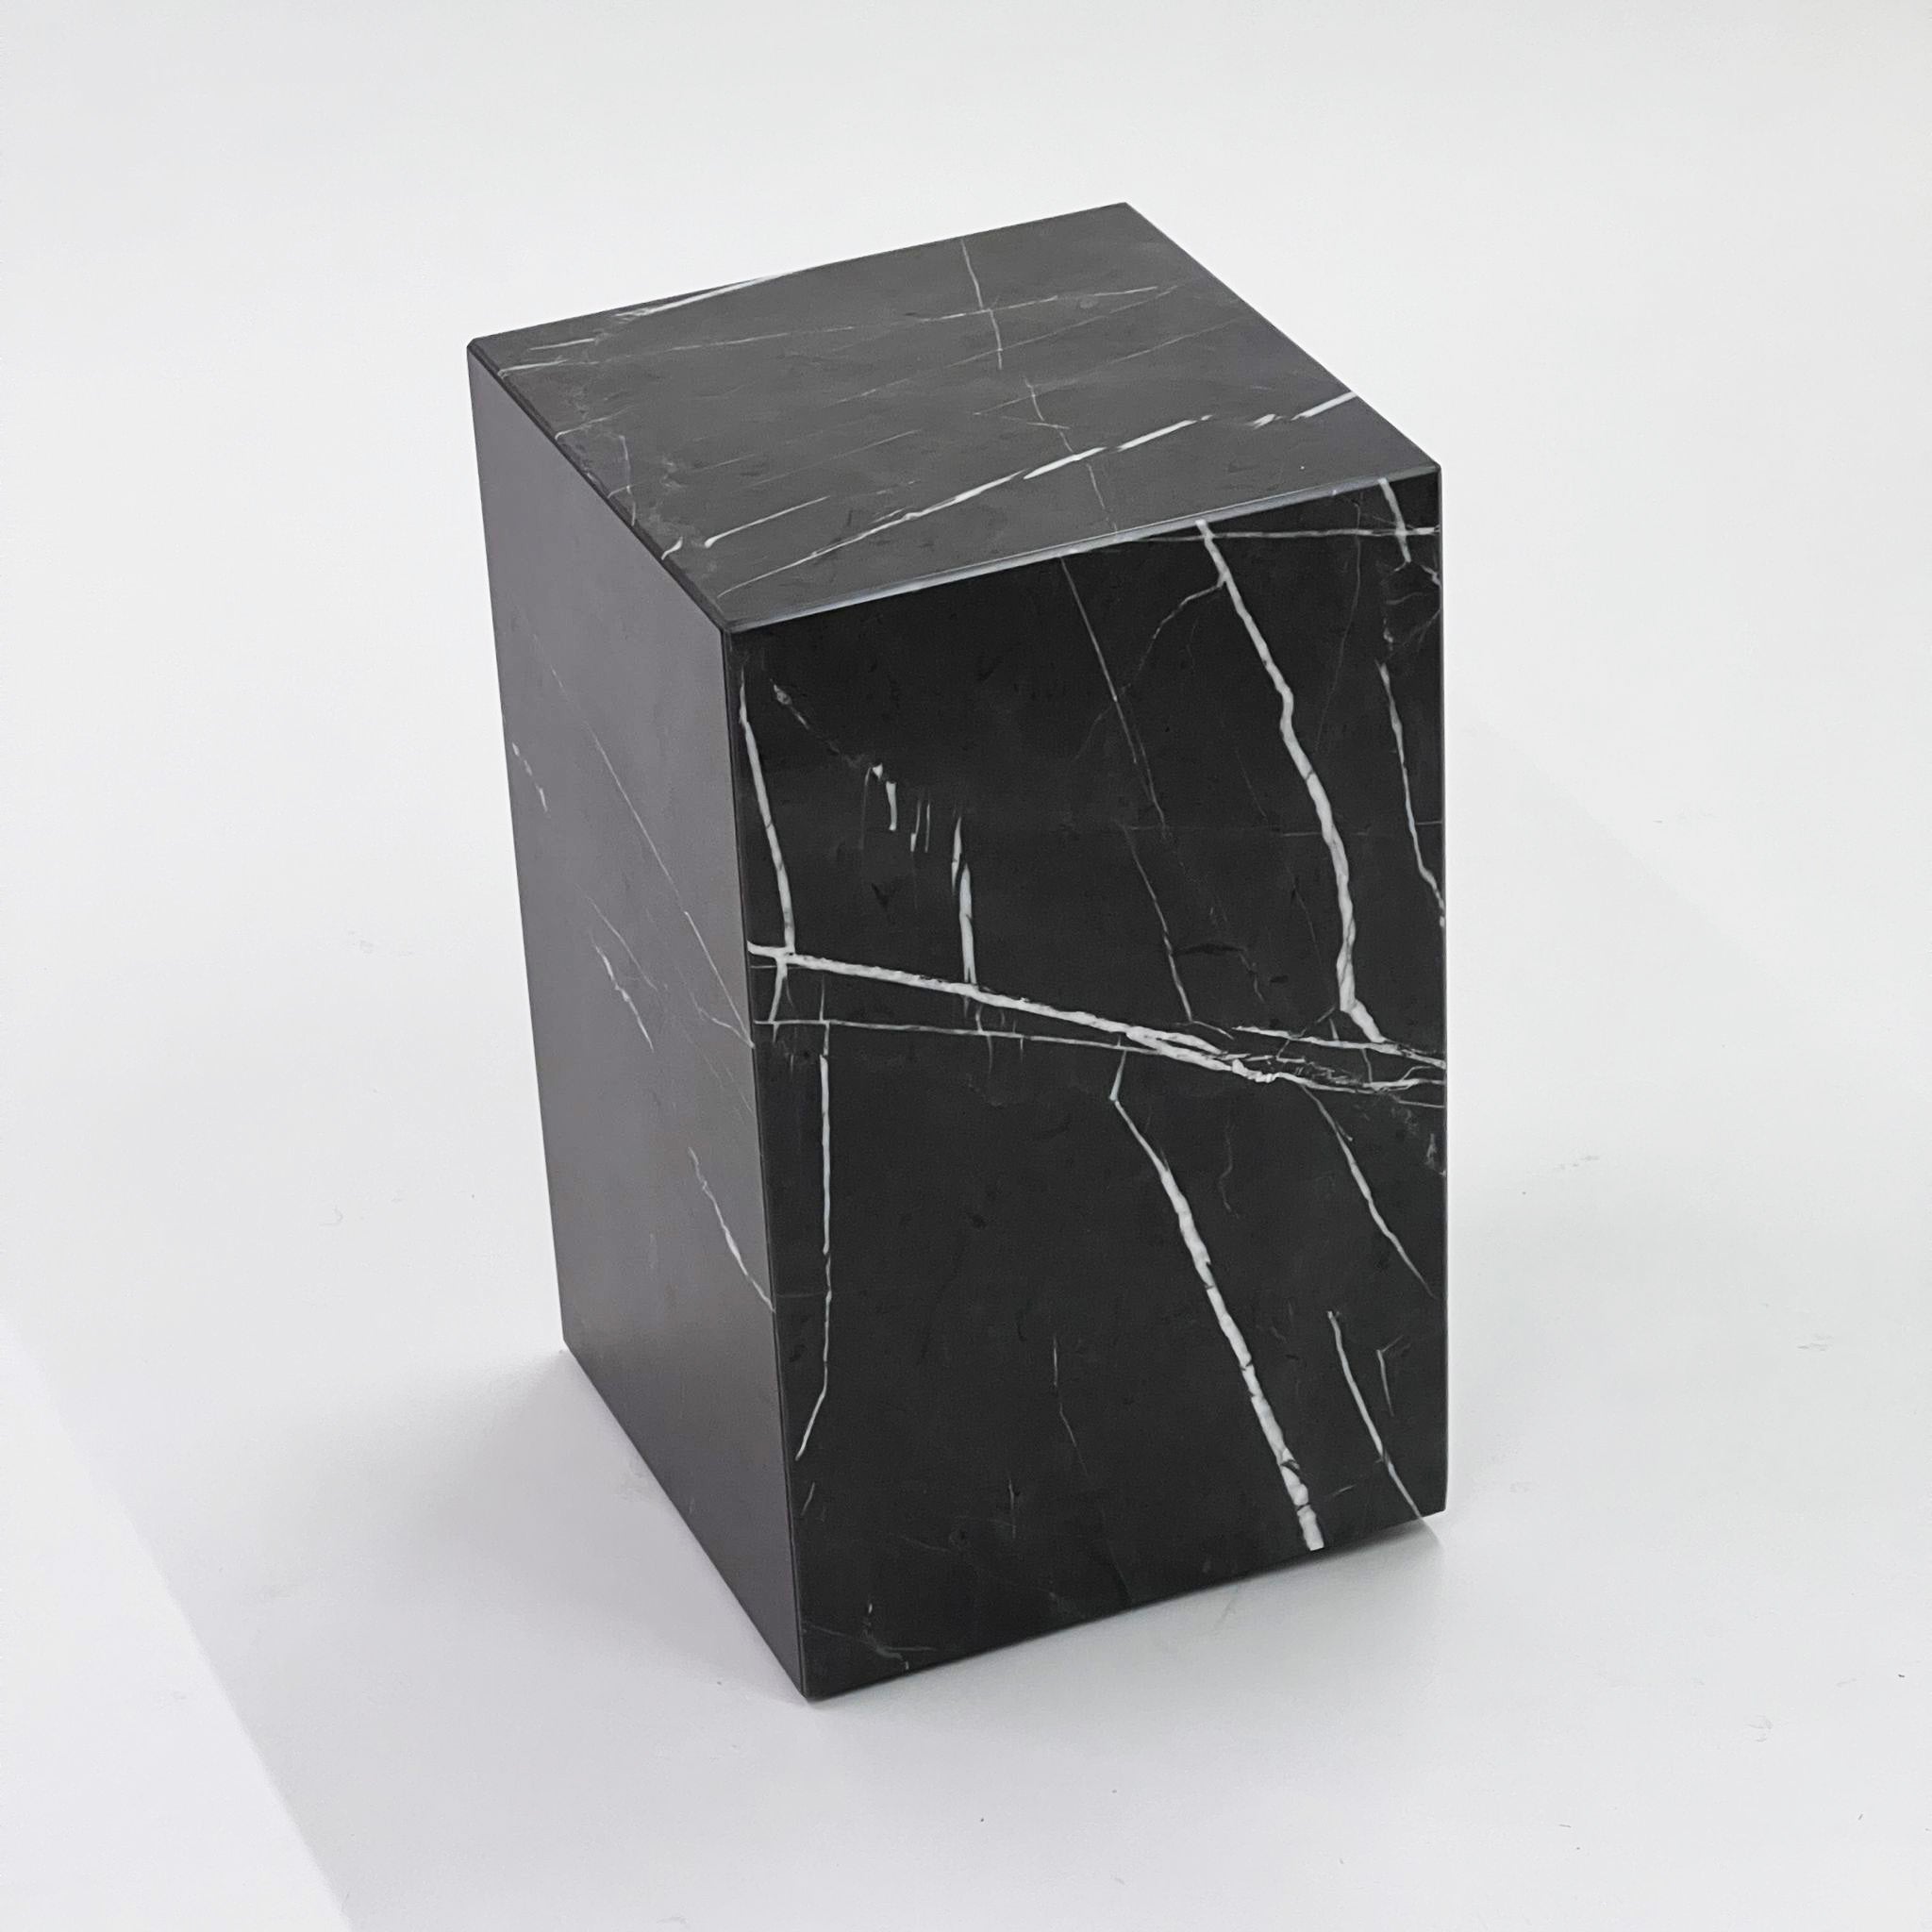 Clearance Plinth Tall / Dark Grey Marble / White Veins by Norm Architects